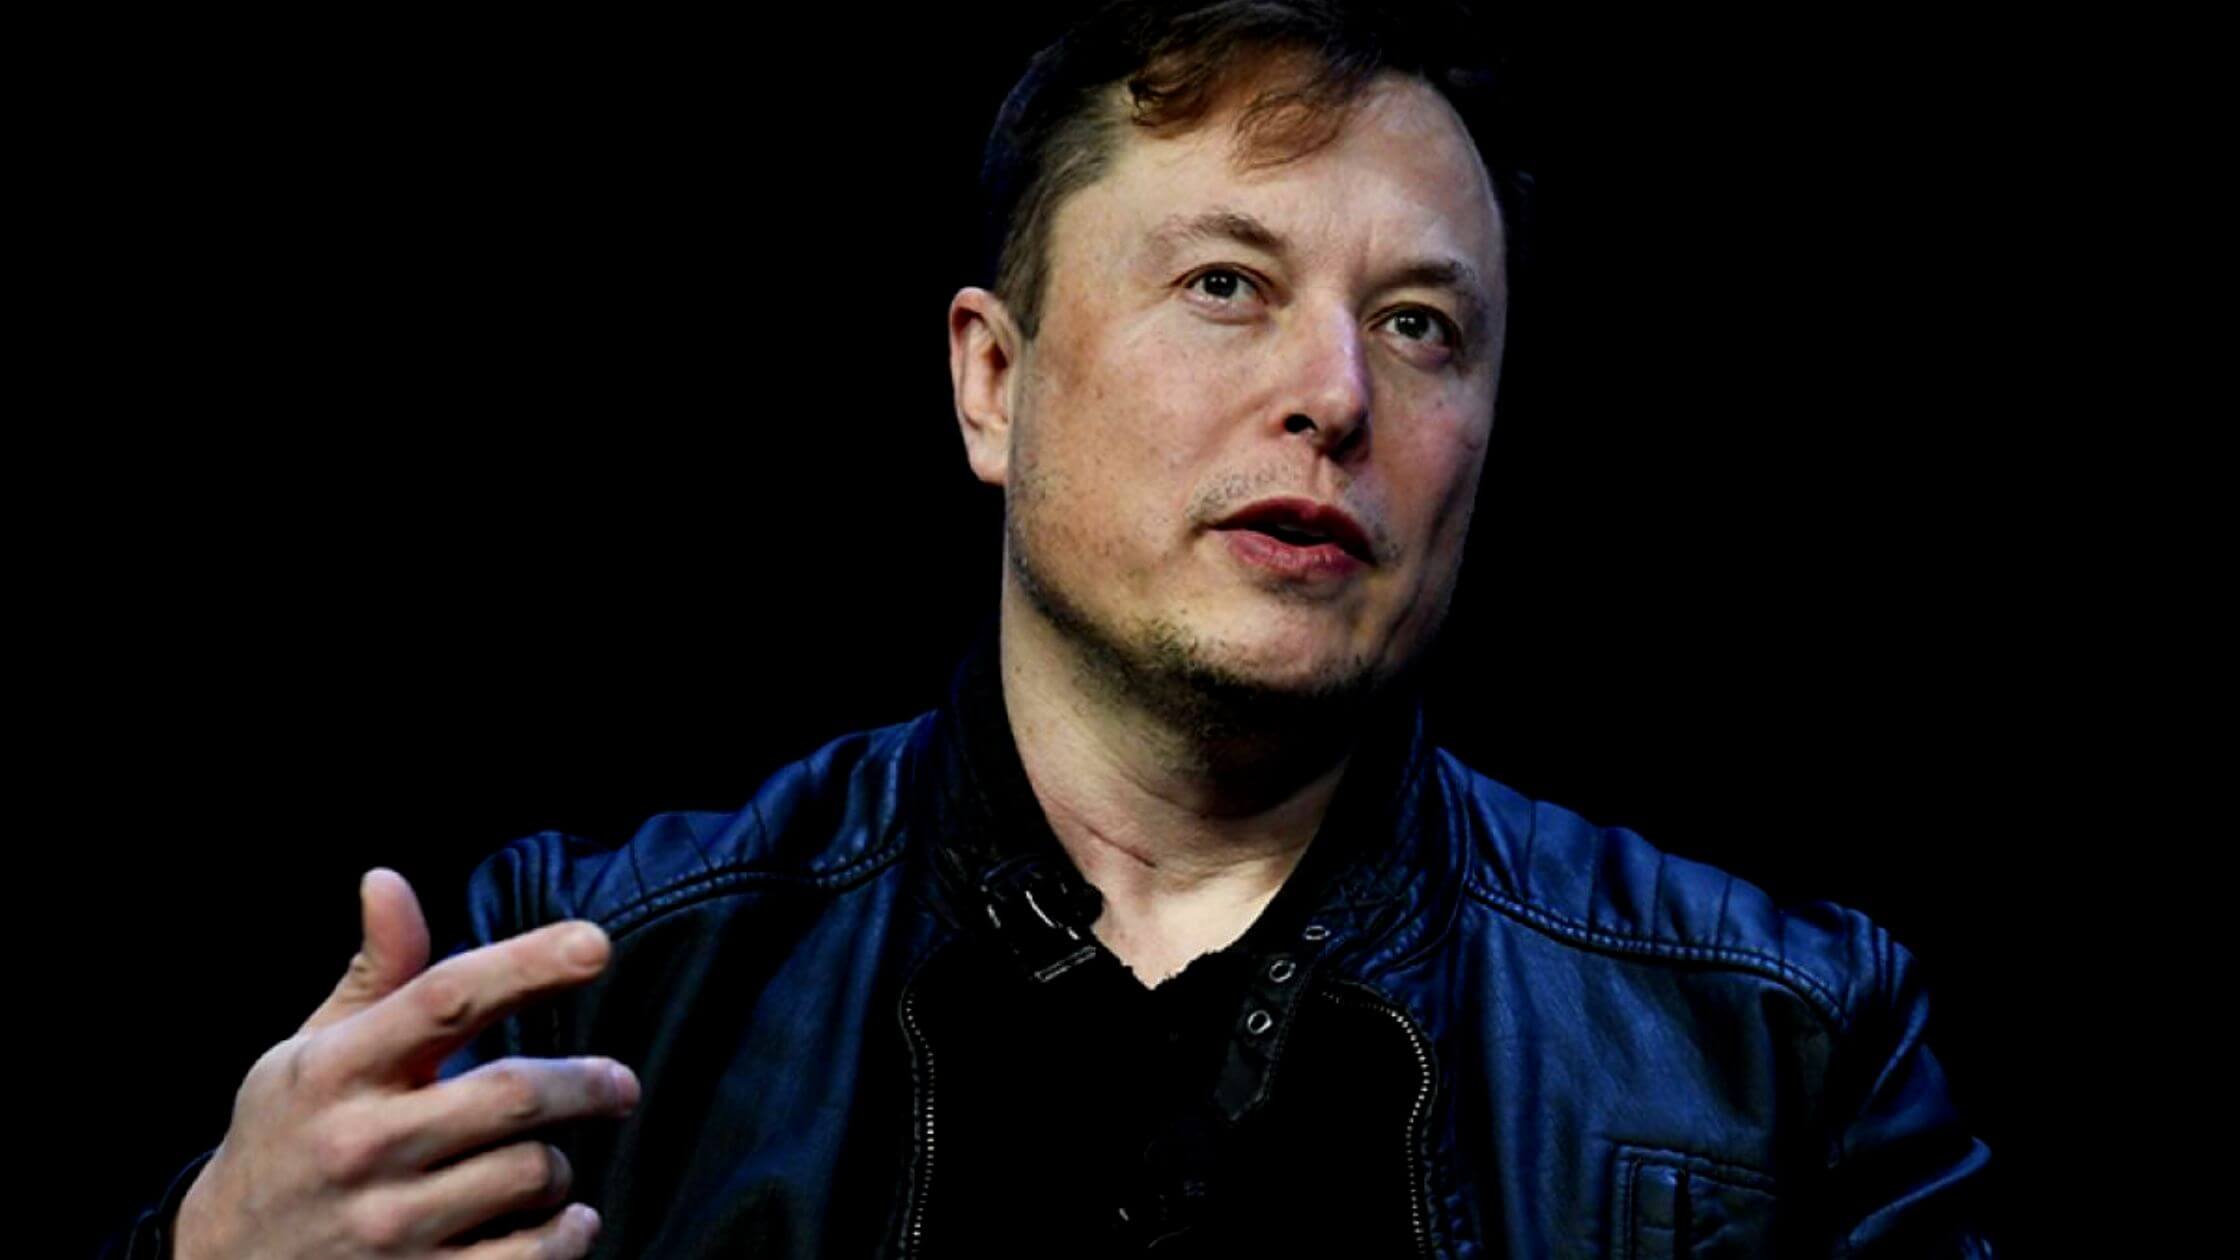 The US Evaluates Musk Deals' Security Including Twitter Purchase